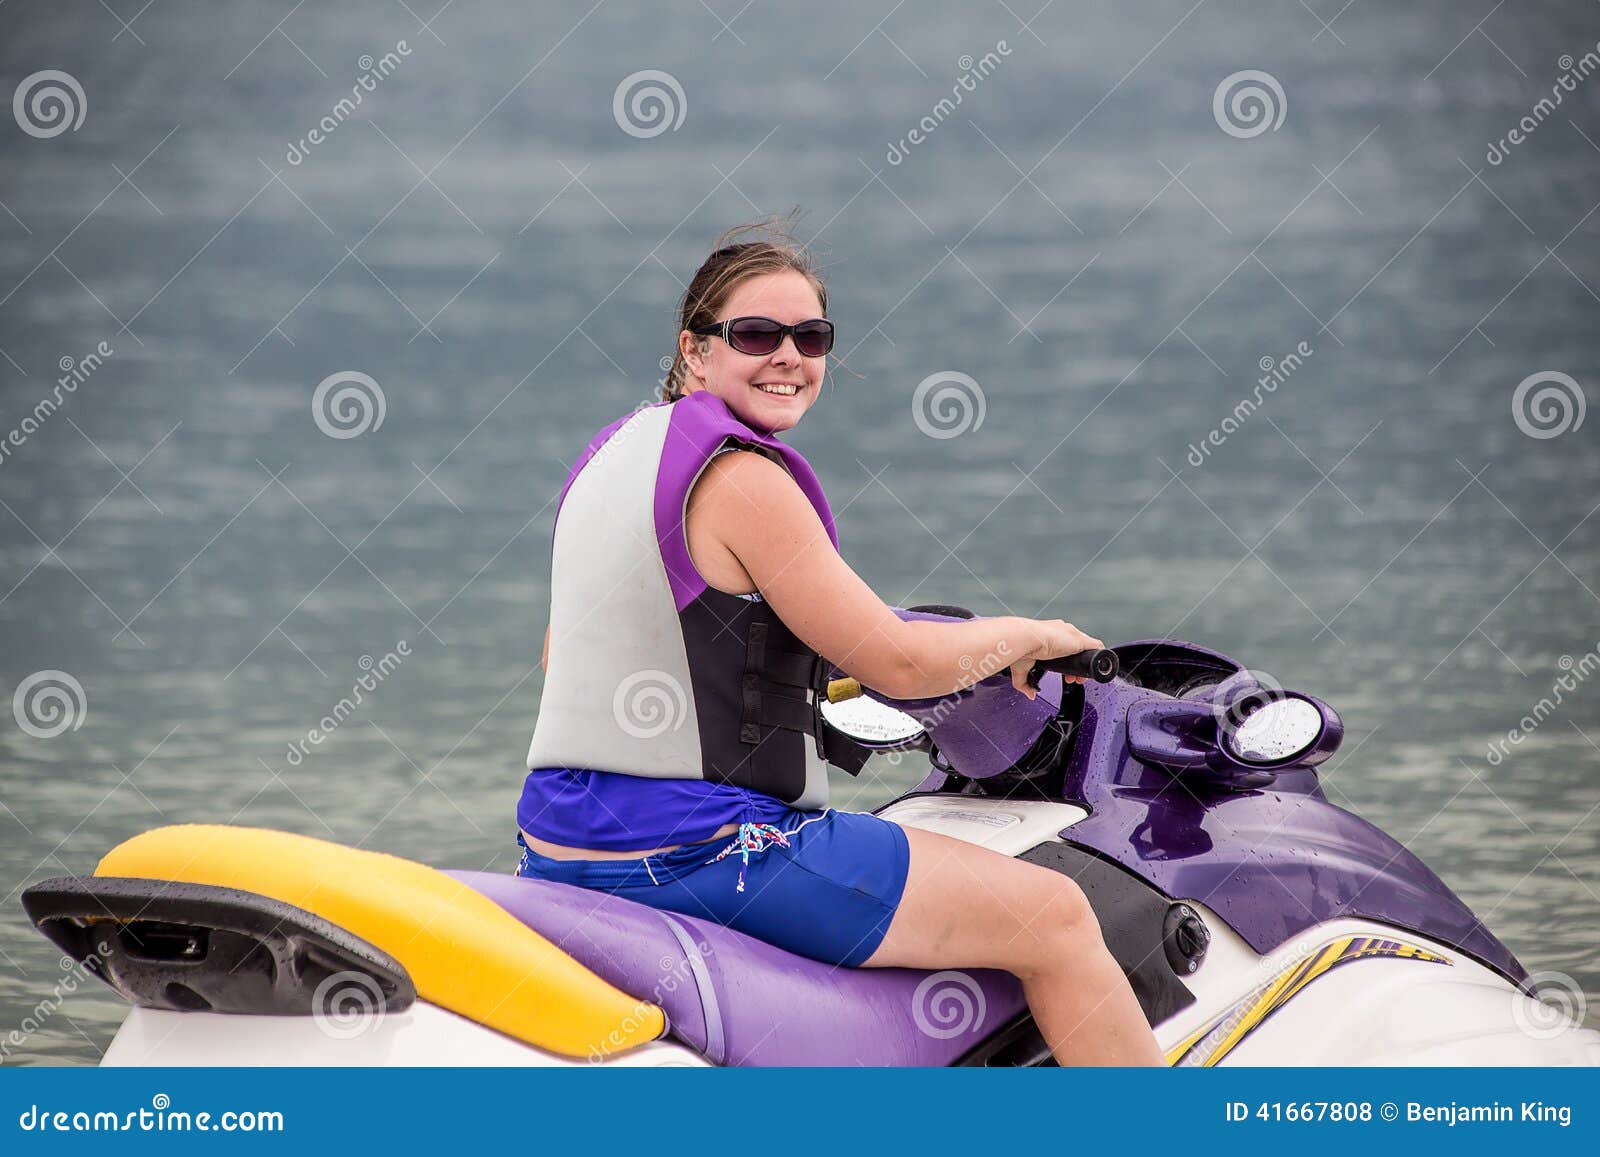 yound woman riding a jet ski stock photo - image of vessel